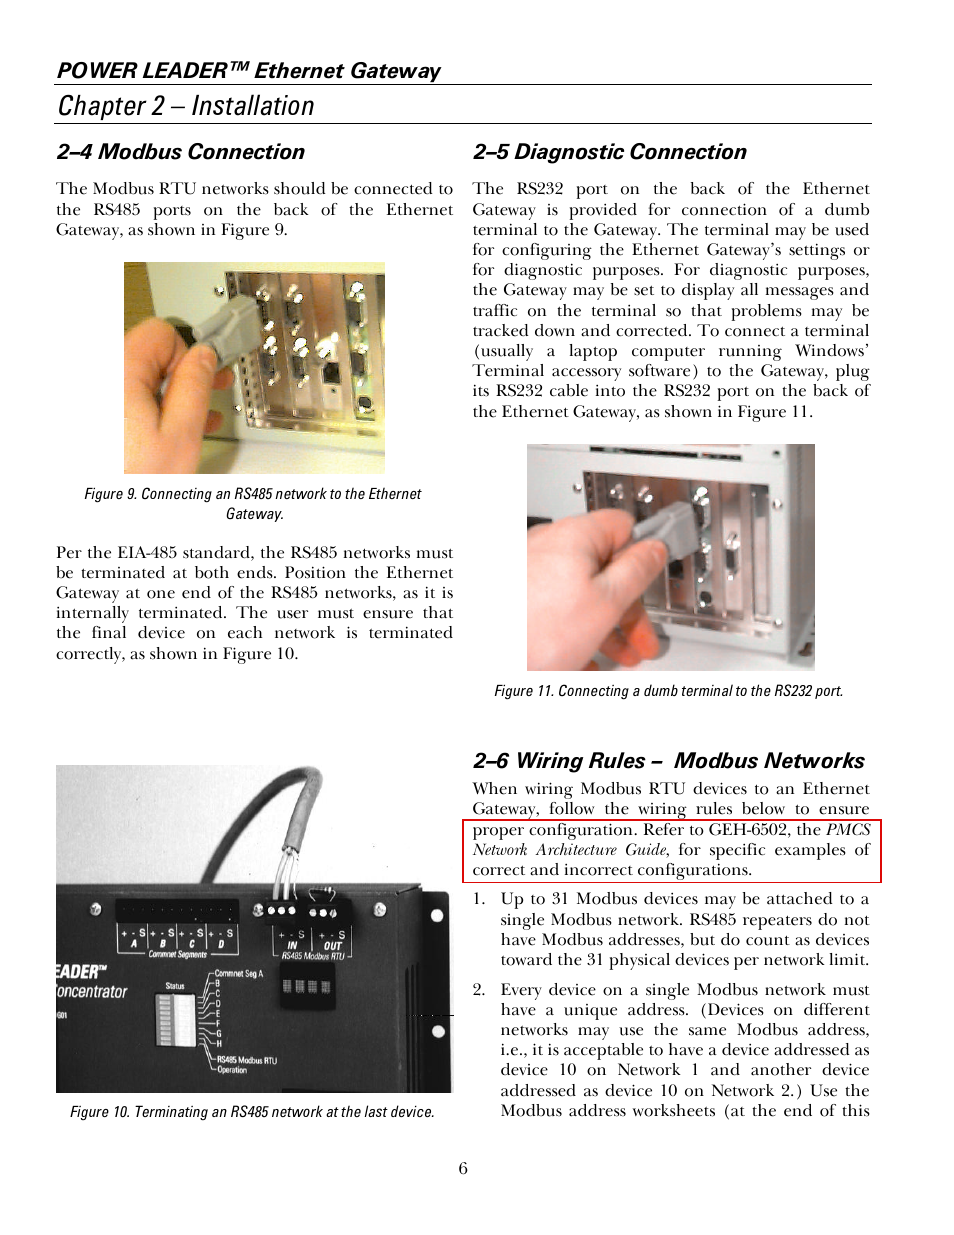 4 modbus connections, 5 diagnostic connection, 6 wiring rules - modbus networks | Chapter 2 – installation, Power leader™ ethernet gateway, 2–4 modbus connection, 2–5 diagnostic connection, 2–6 wiring rules – modbus networks | GE GEH6505A User Manual | Page 10 / 24